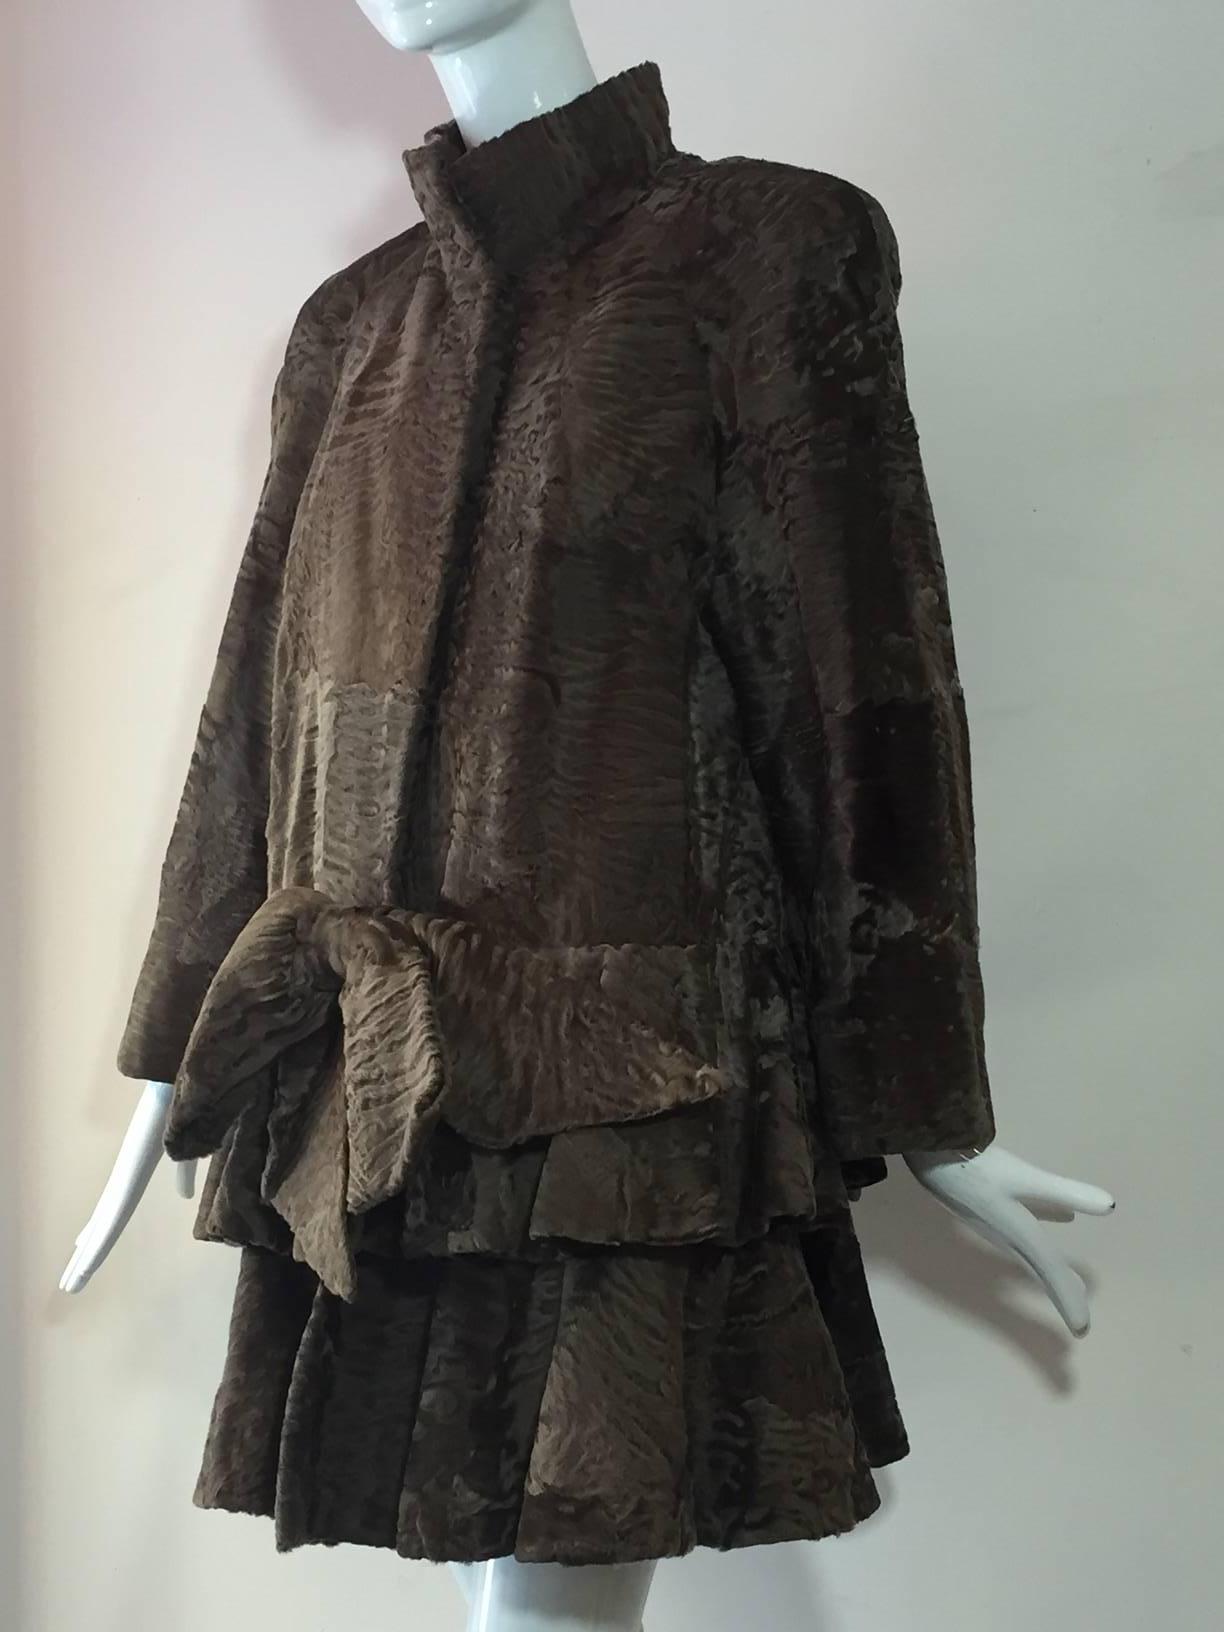 A gorgeous 1980s James Galanos taupe swakara lamb coat:  Raglan sleeves with padded shoulders and banded collar.  Dropped waist styling, a la 1920s, with tiers of flared panels and front bow.  Slight swing shape to back panel. Bergdorf Goodman. 